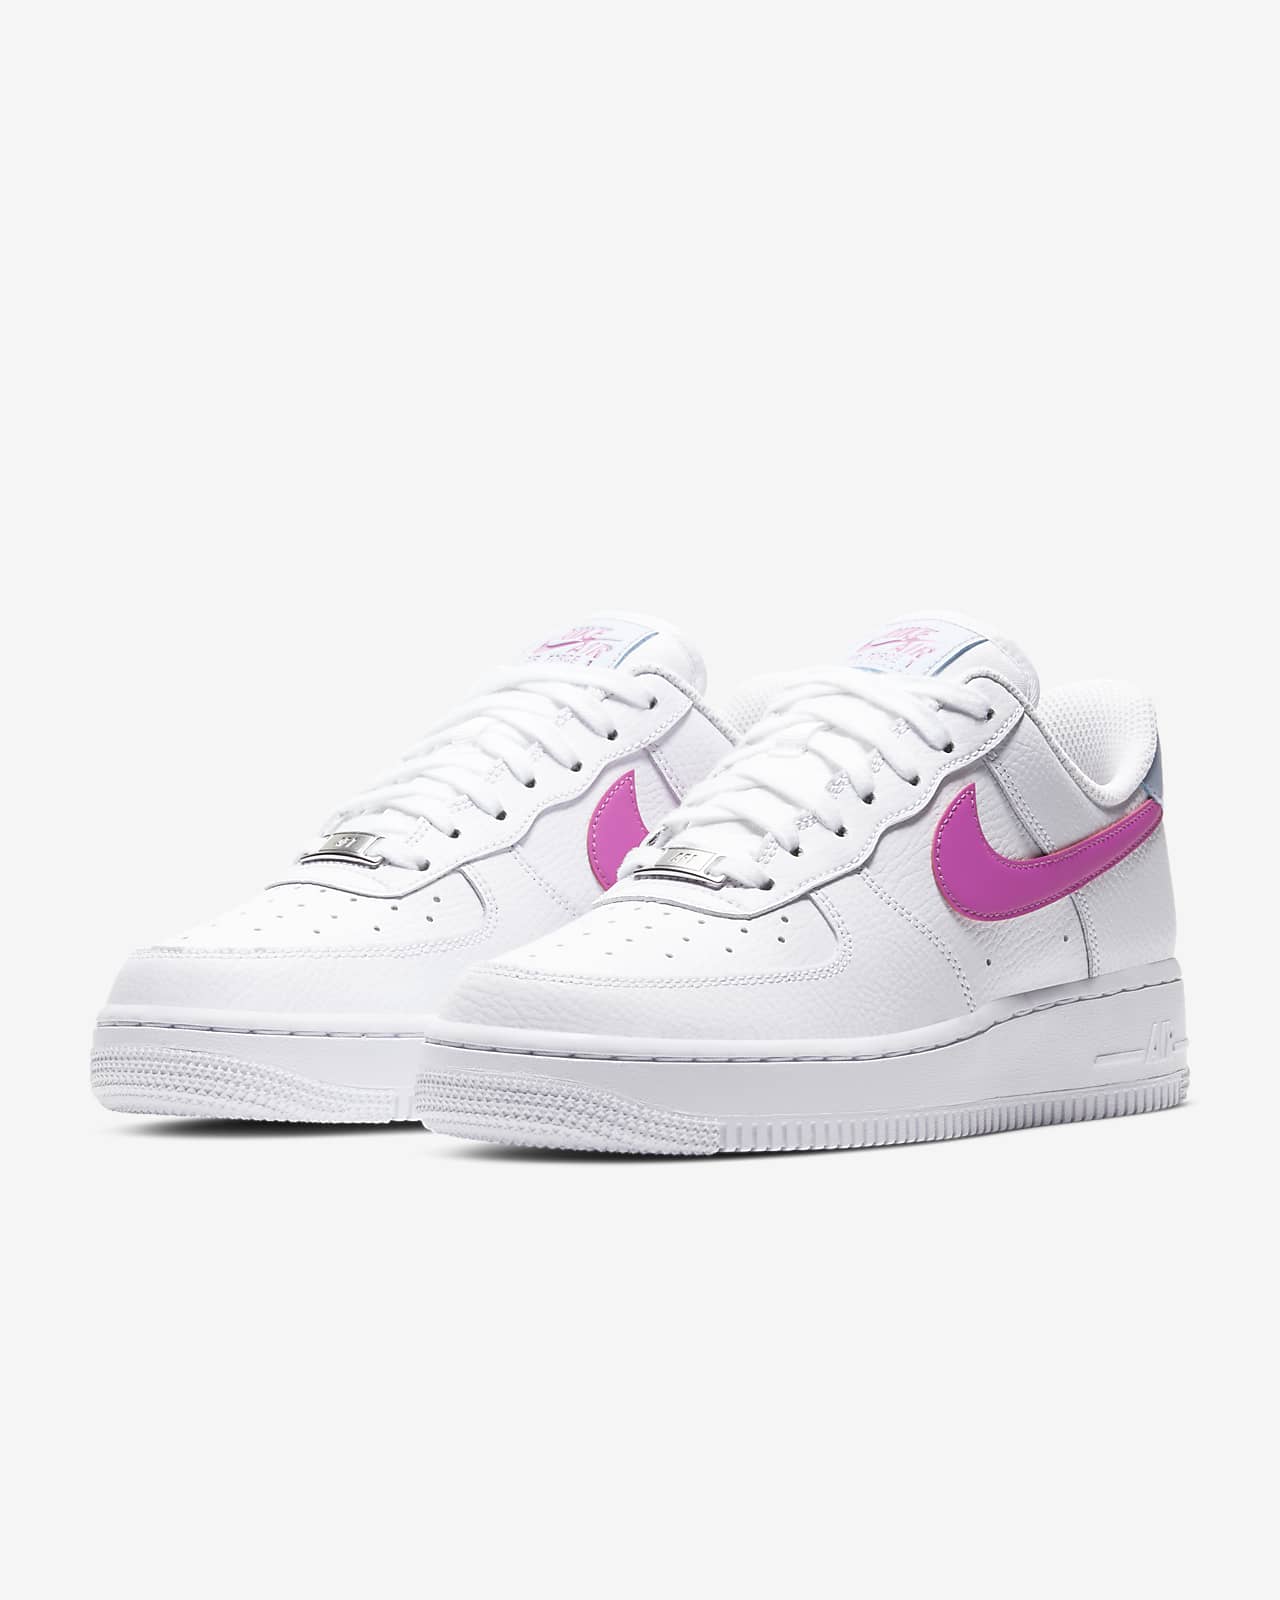 nike air force 1 07 women's size 7.5